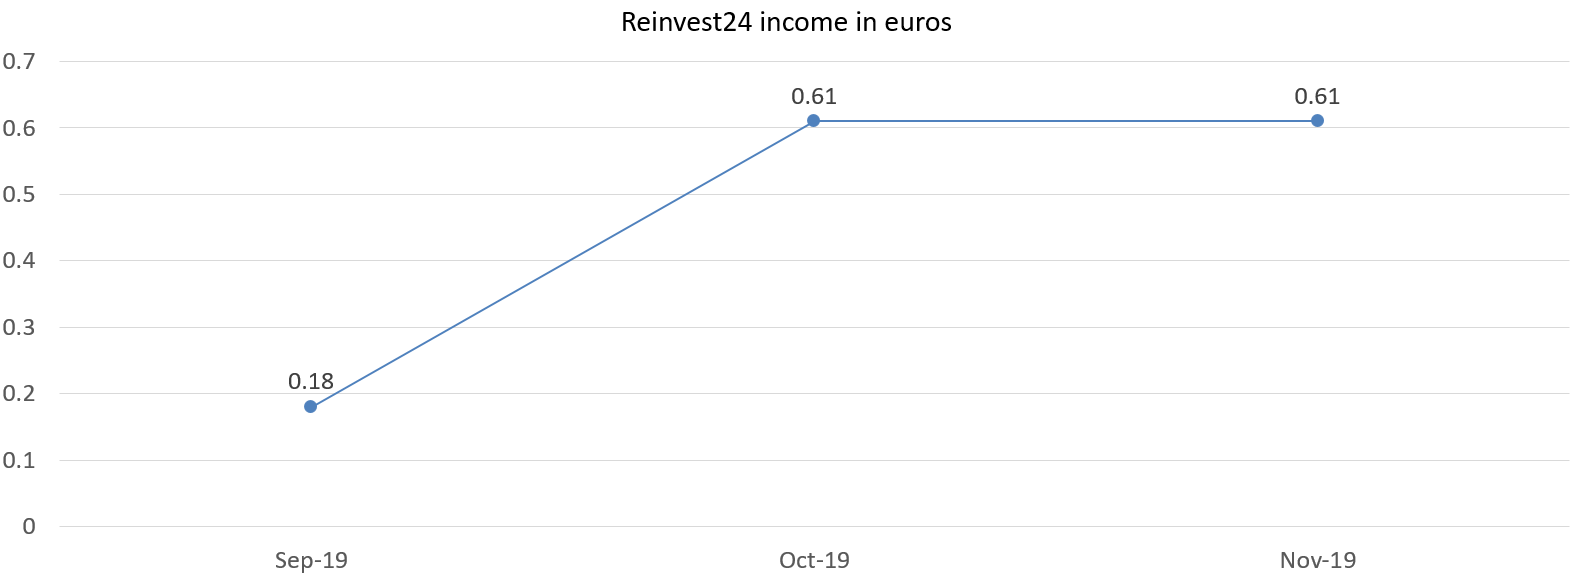 Reinvest24 interest income in november 2019